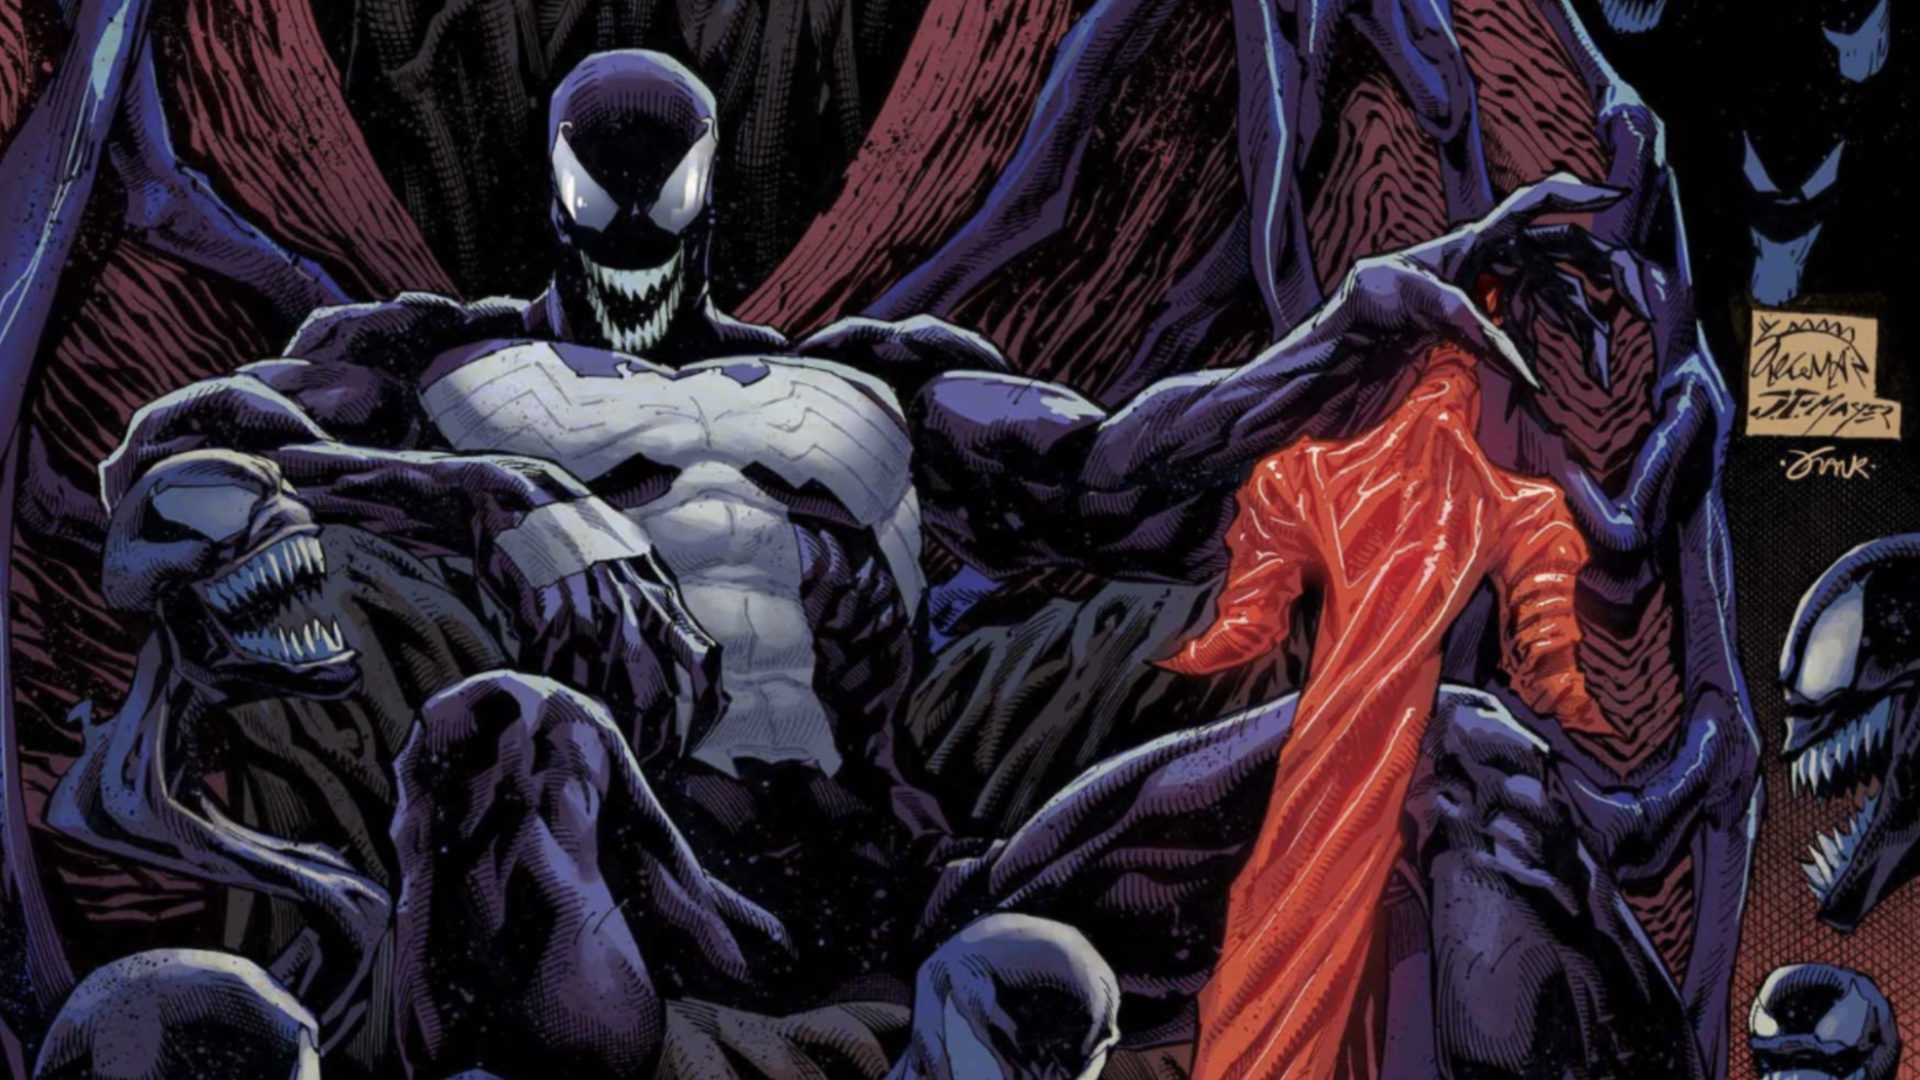 Thor - Love and Thunder's hidden comic book connection to Venom